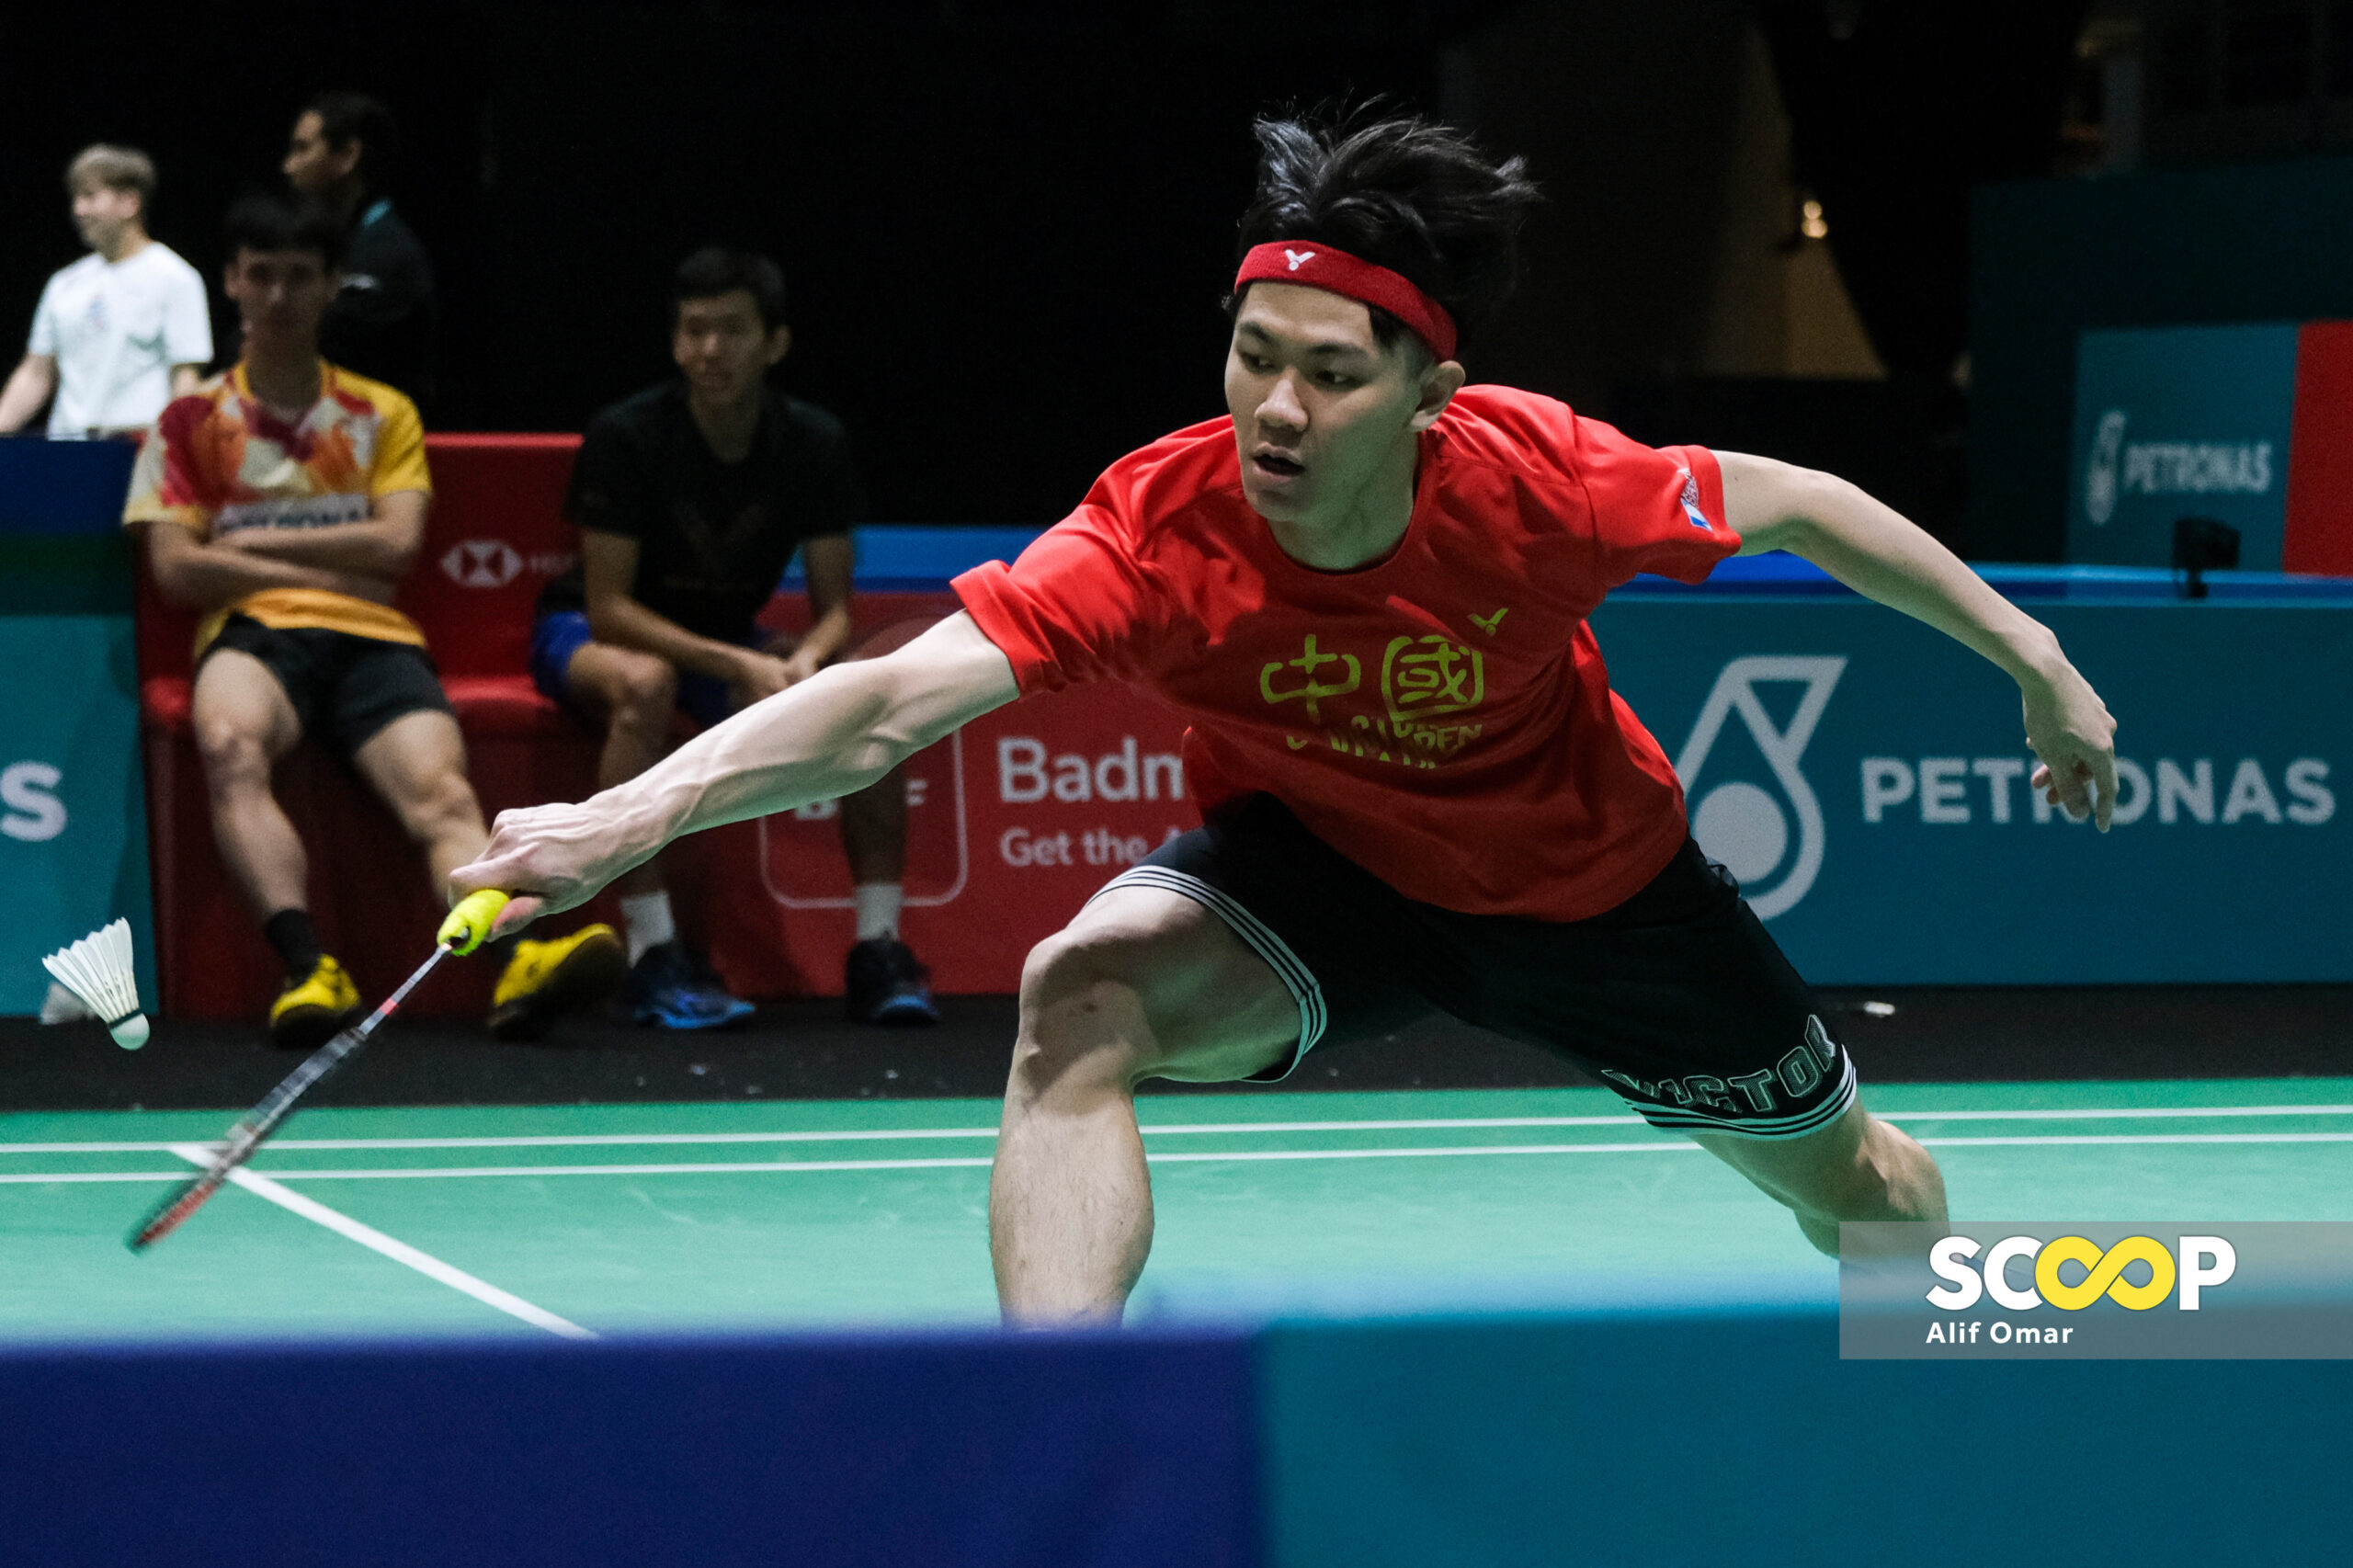 Indonesia Masters: back-to-back quarter-finals for Zii Jia